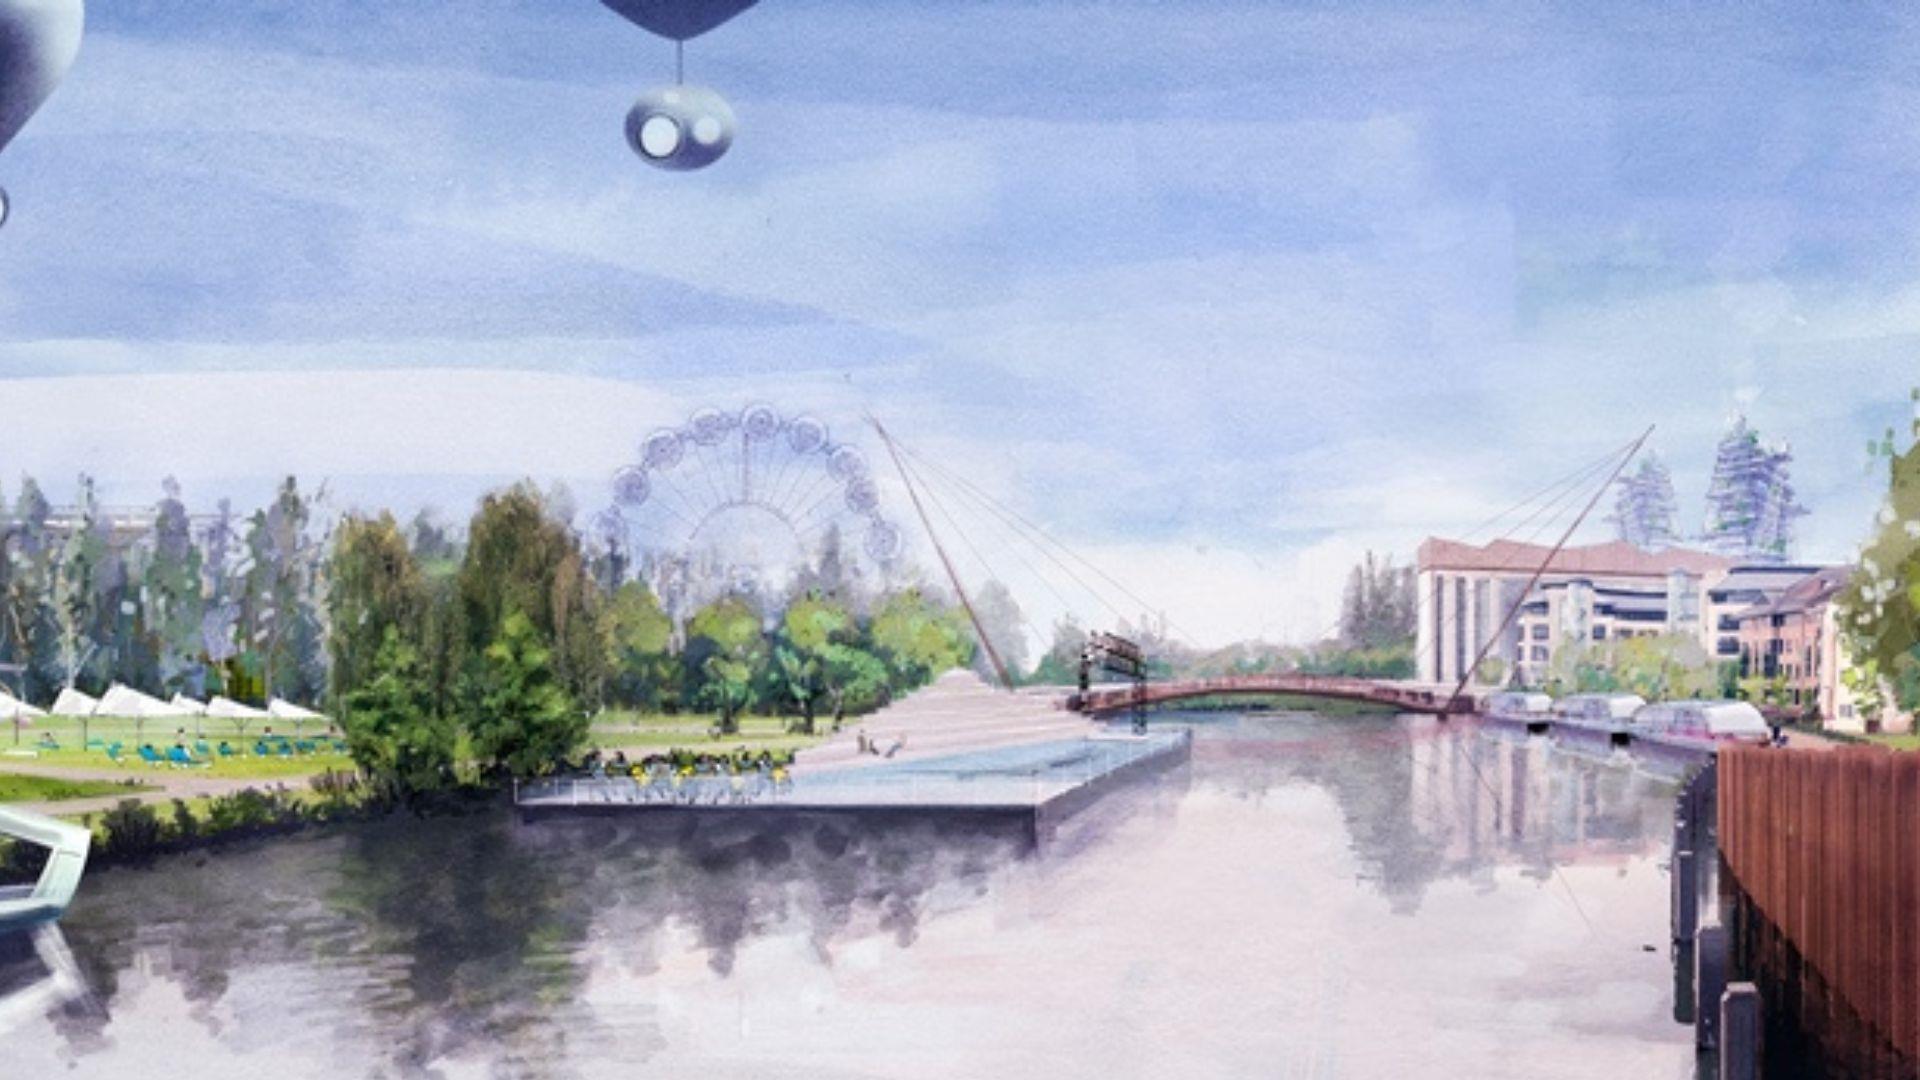 Future vision of the Thames